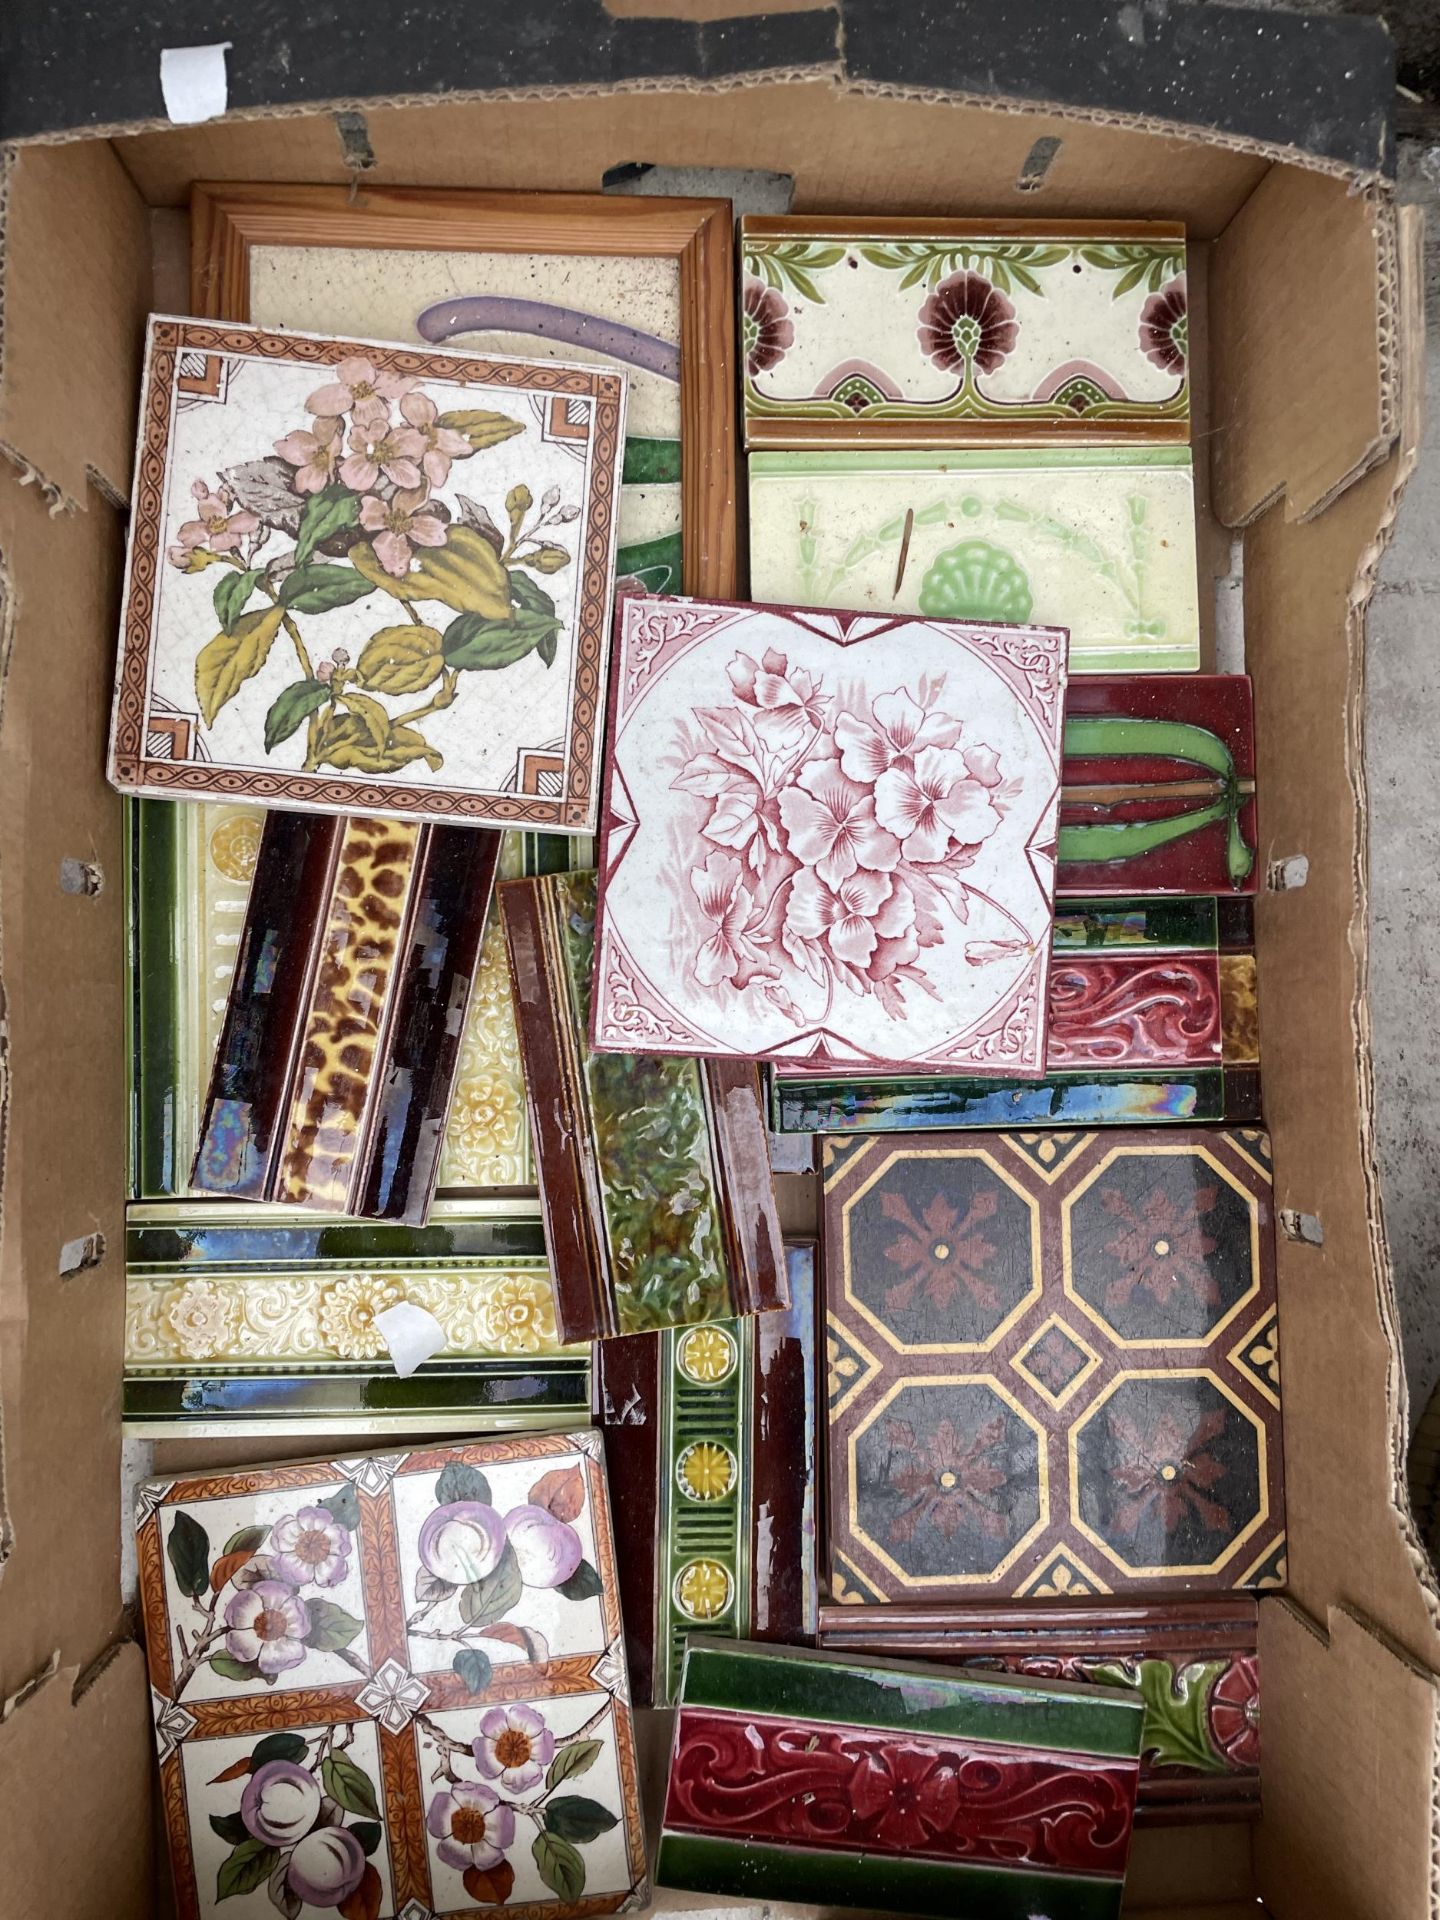 AN ASSORTMENT OF DECORATIVE VINTAGE WALL TILES - Image 2 of 2